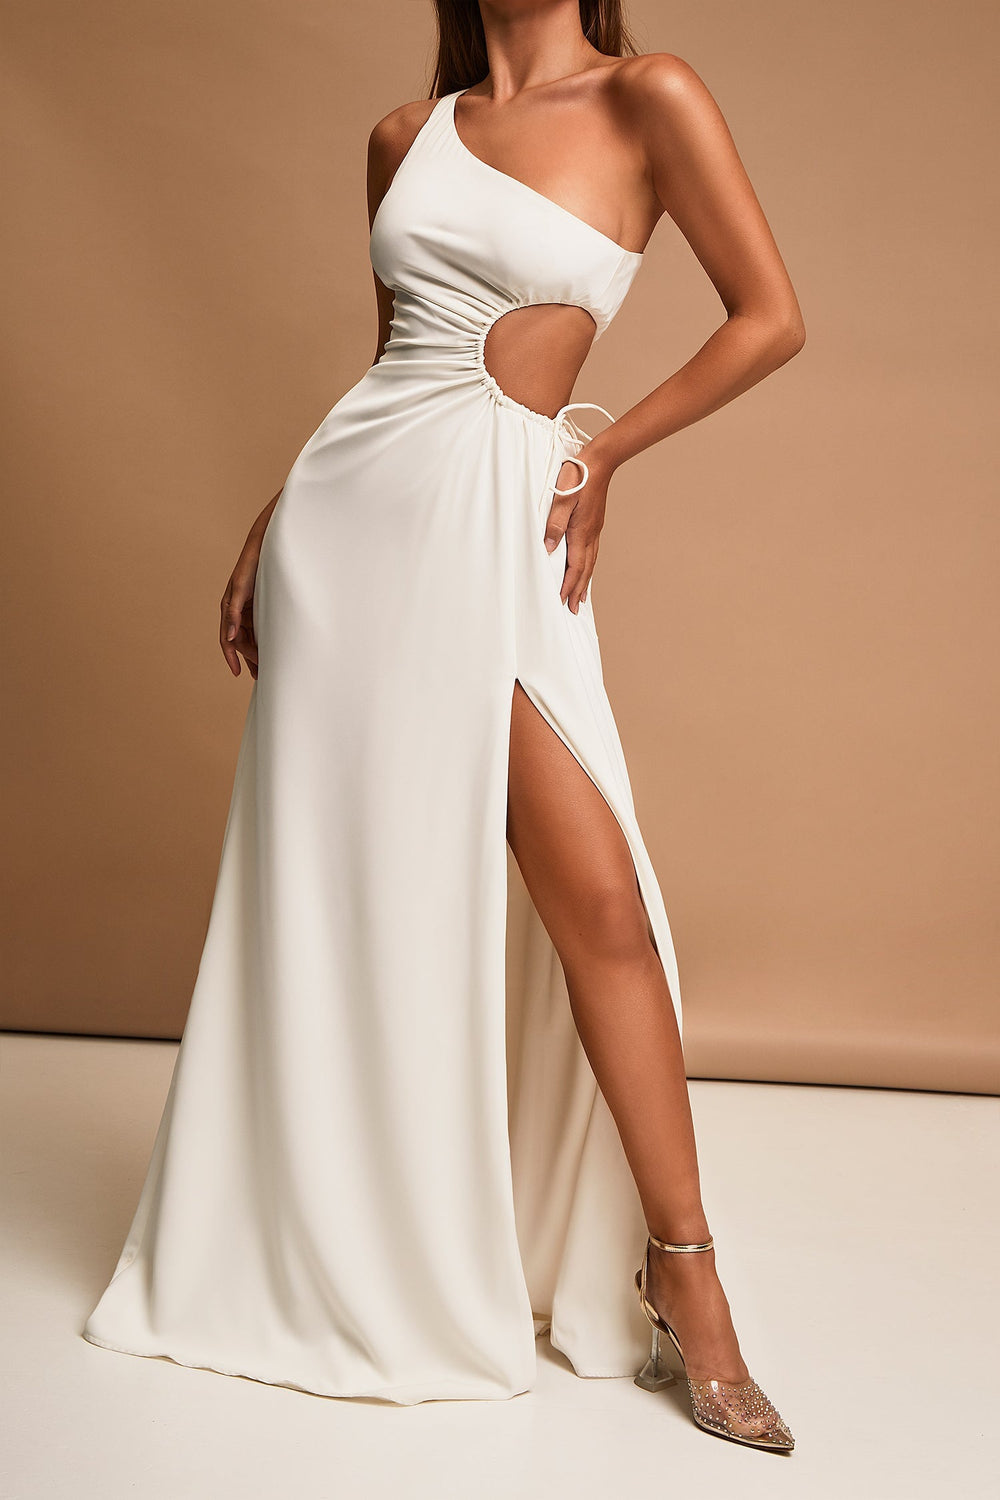 Rialda White Satin Maxi Dress with Waist Cut-Outs